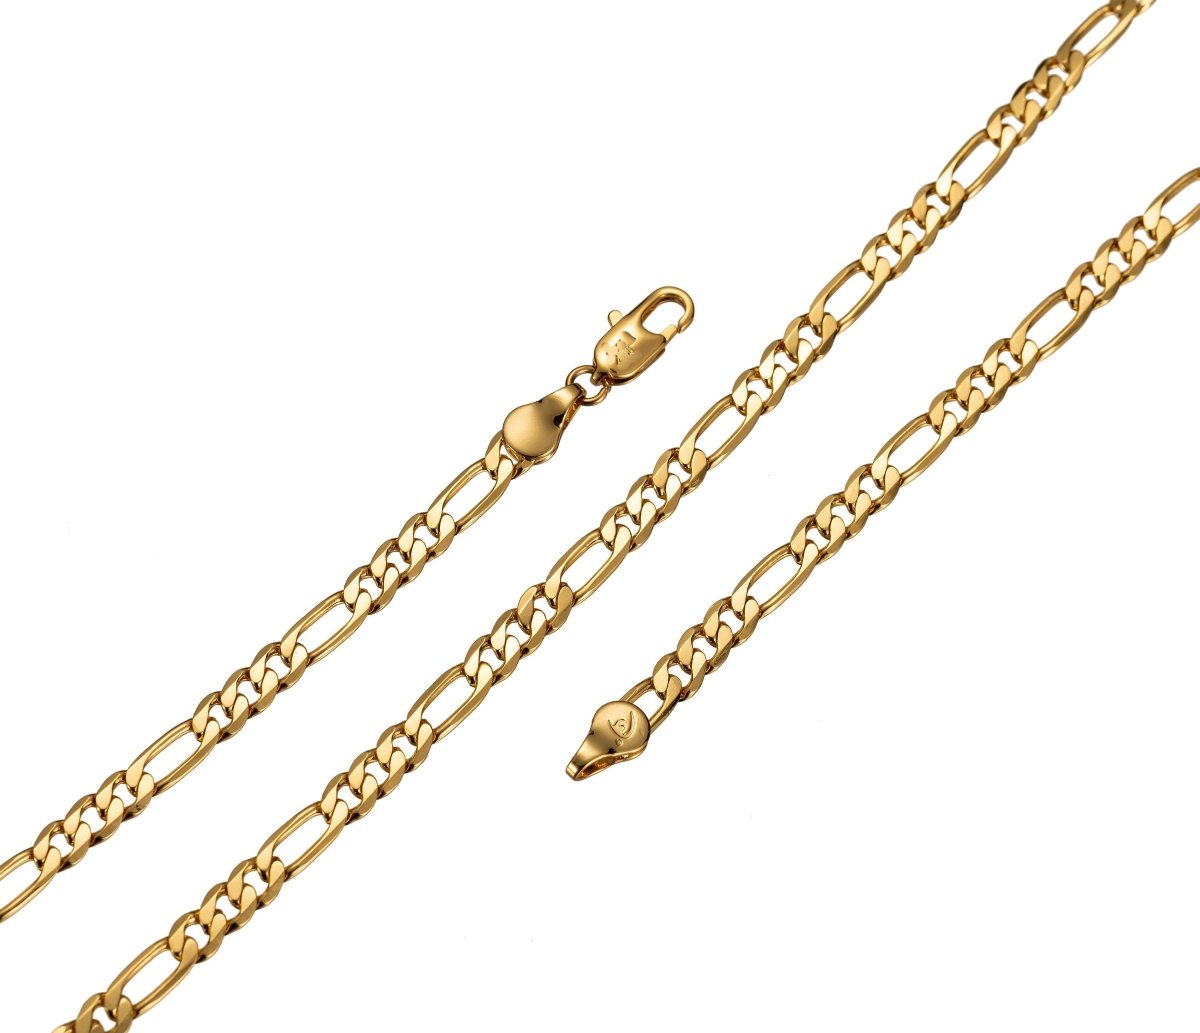 24K Gold Filled 4mm Flat Figaro Chain GF Finished Necklace 20" inch Gold Chain Finished Gold filled Chain Ready To Wear Chain Necklace, 3mm Figaro Necklace w/ Lobster Clasps | CN-483 Clearance Pricing - DLUXCA